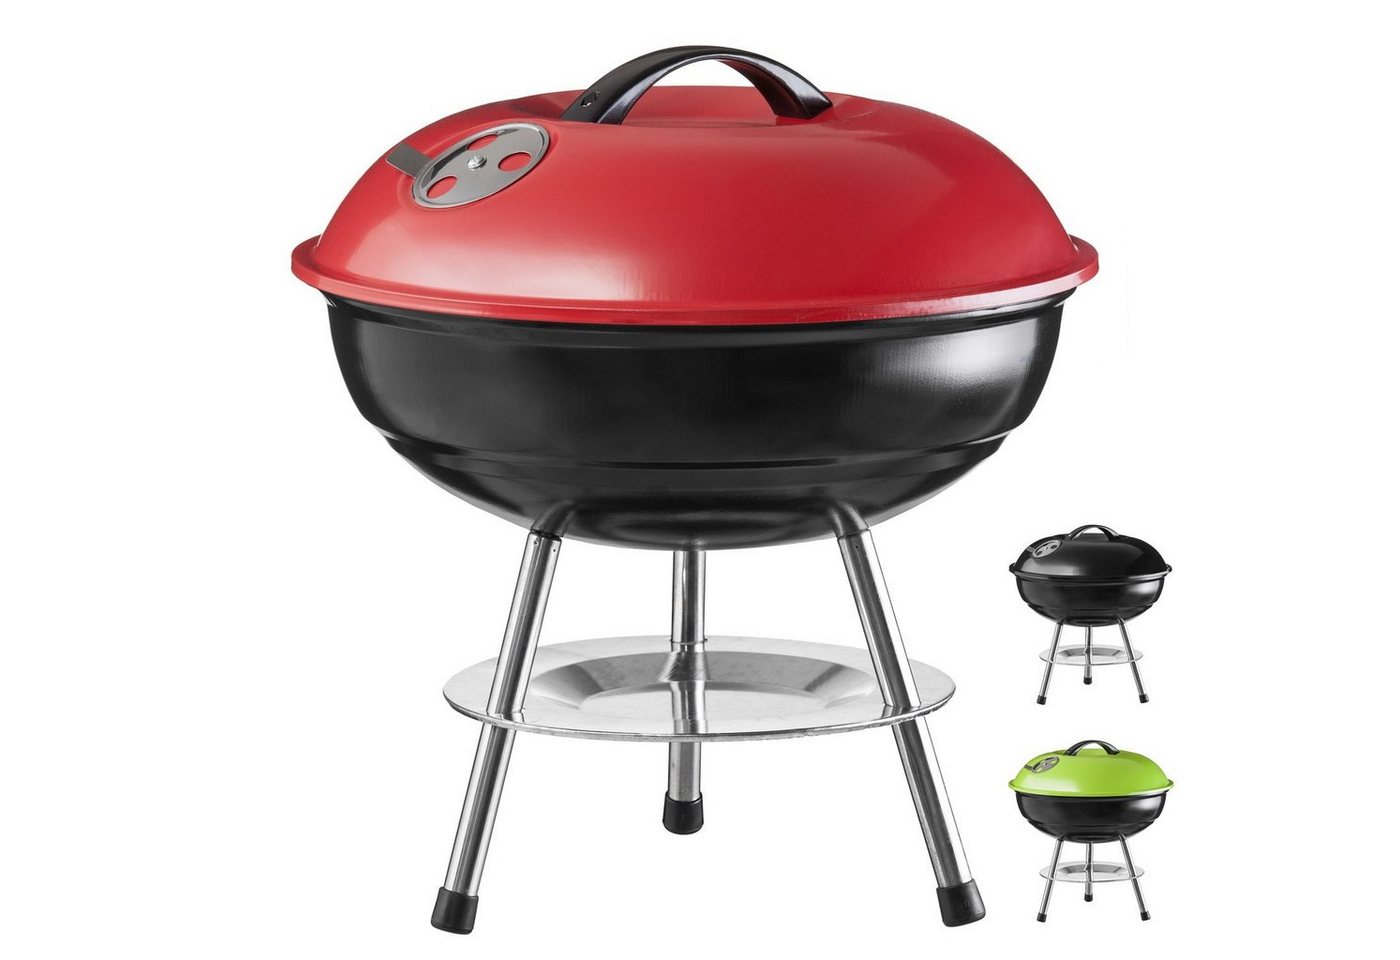 Goods+Gadgets Standgrill BBQ Grill Mini Kugelgrill, Camping Holzkohle-Grill Tischgrill von Goods+Gadgets